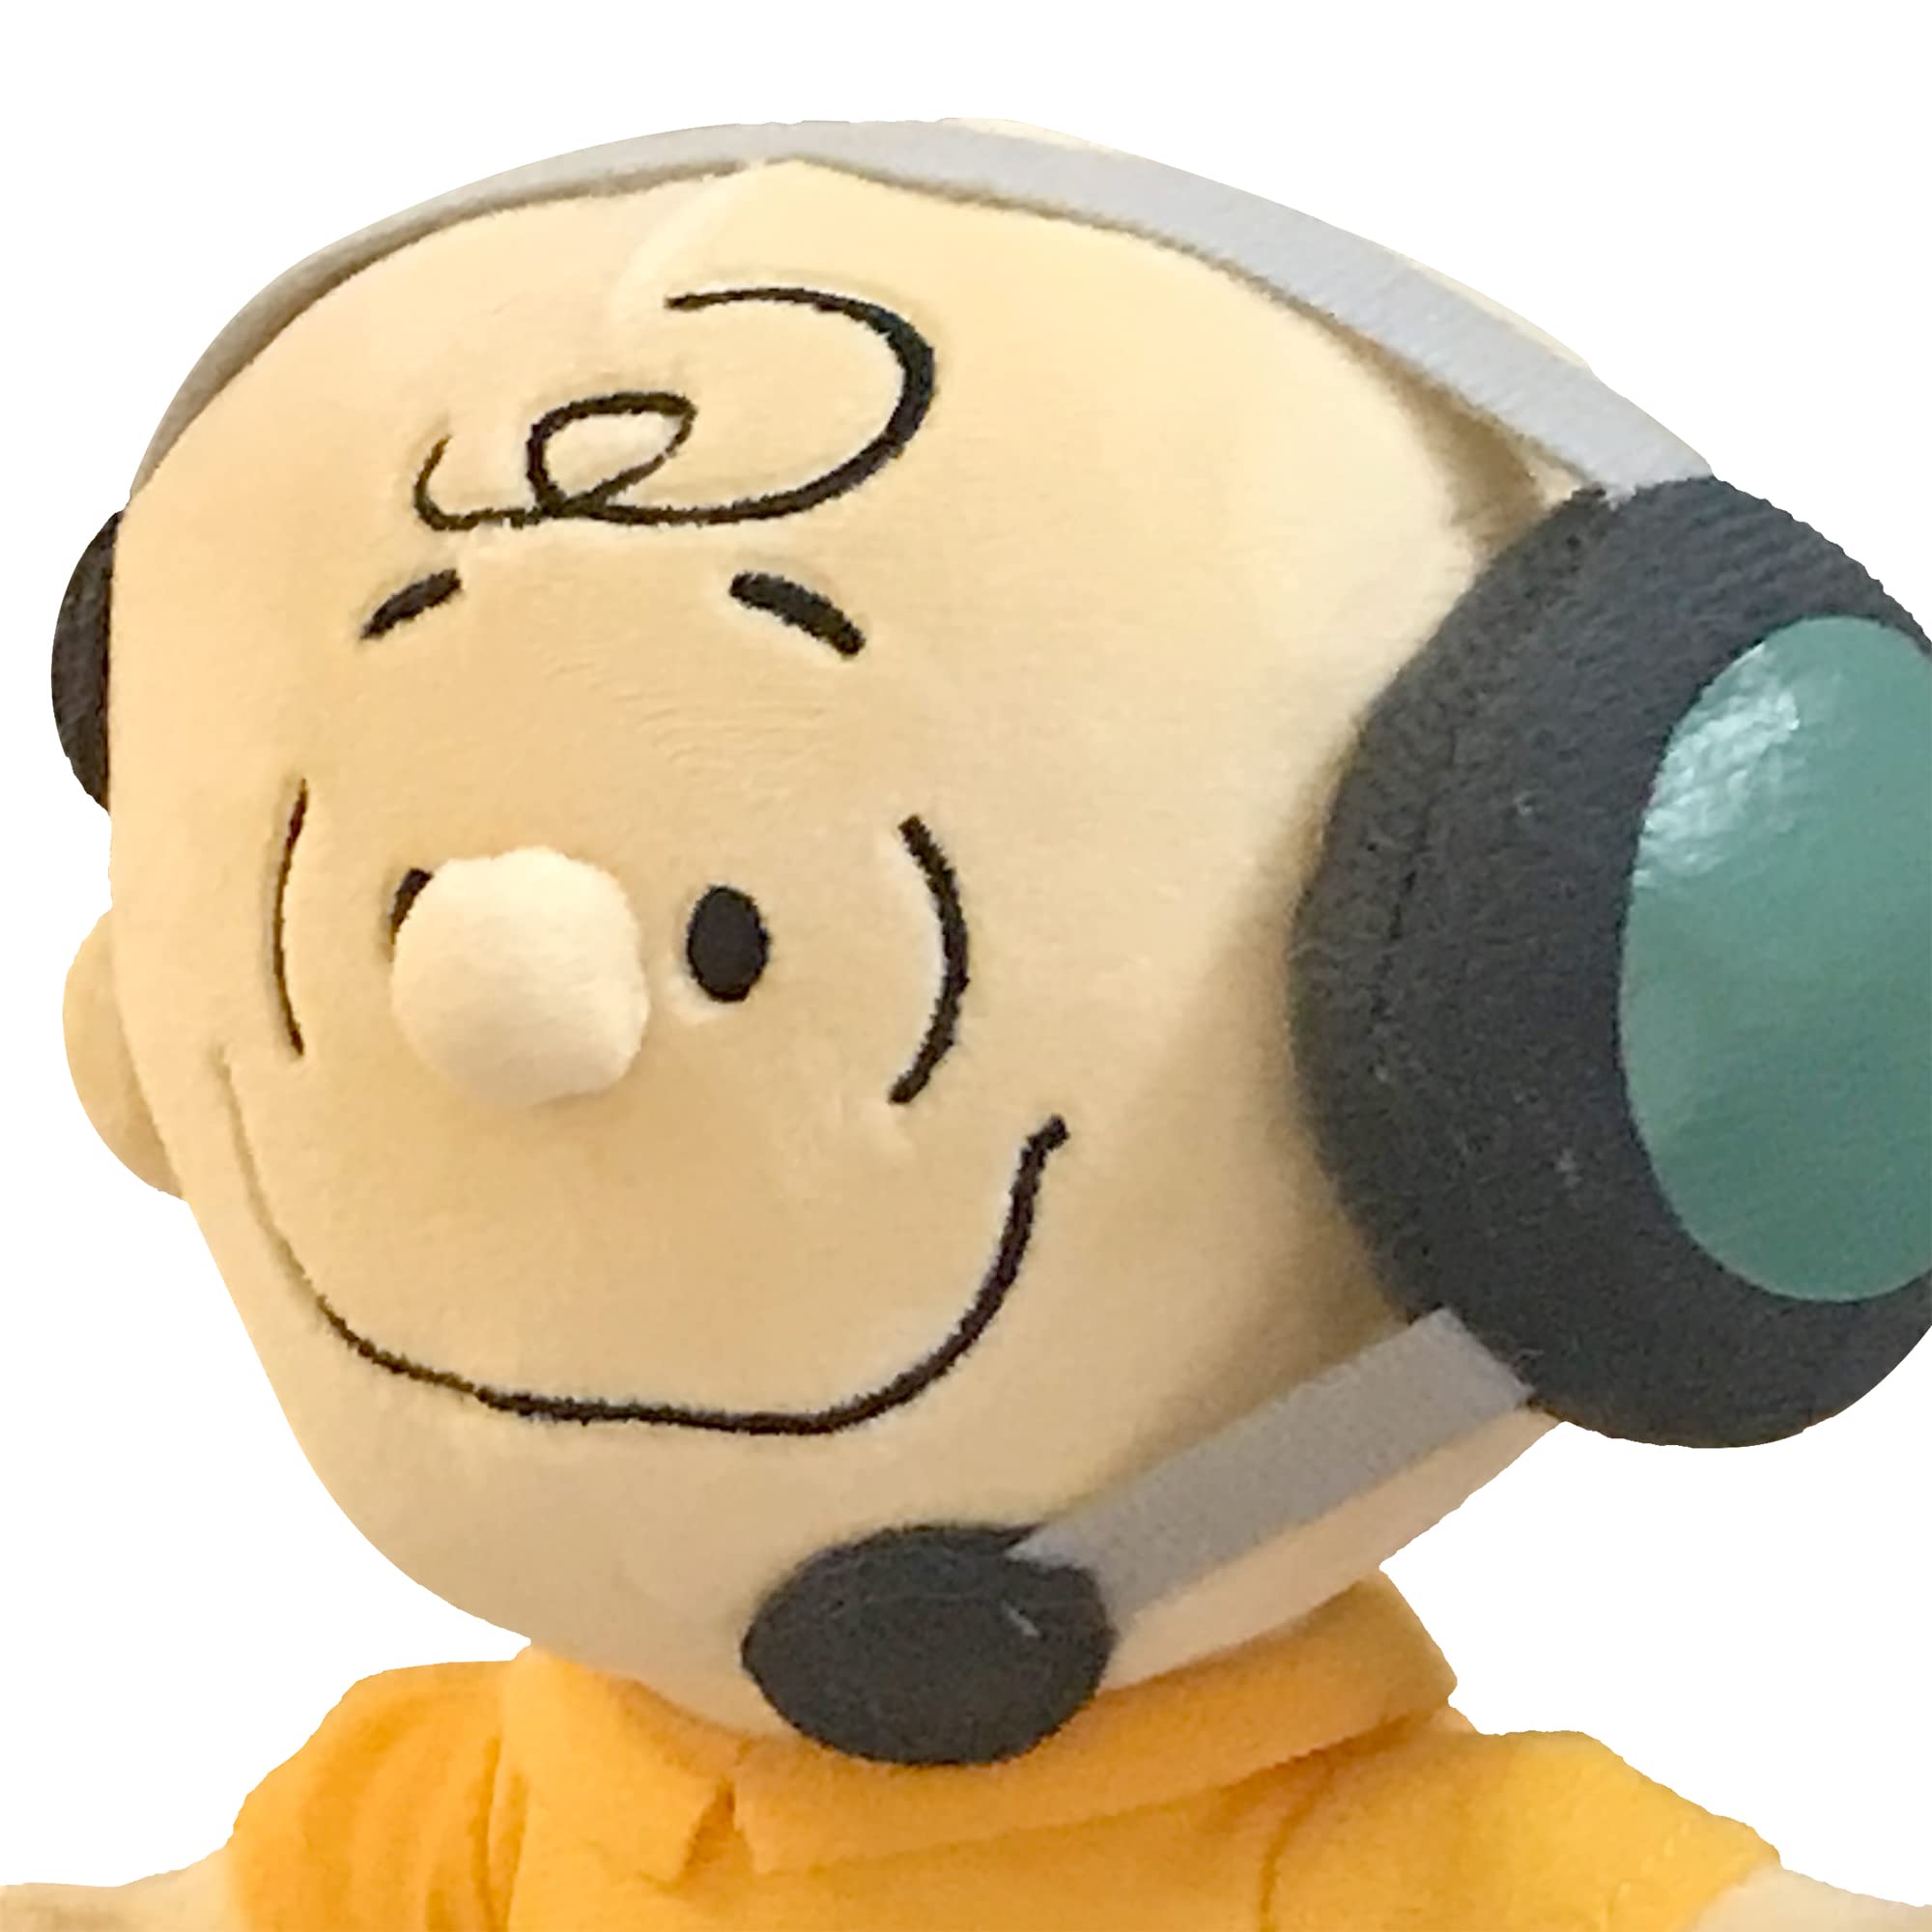 Jinx Official Peanuts Collectible Plush Charlie Brown, Excellent Plushie Toy for Toddlers & Preschool, Mission Control NASA, Snoopy Team